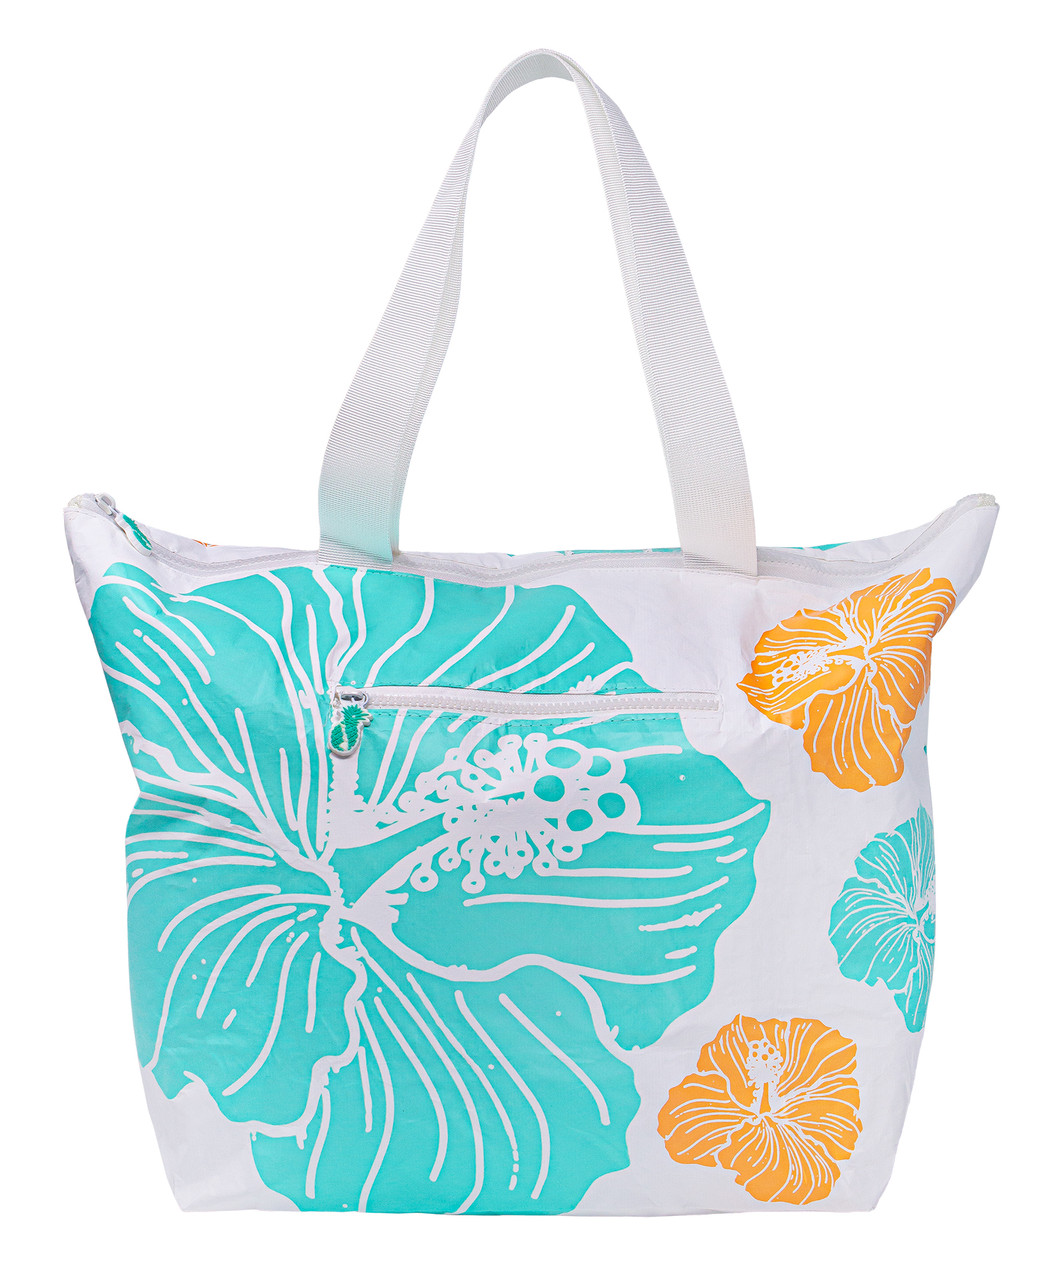 Hawaii Loa Tyvek Water Resistant Tote Bag: White and Turquoise Hibiscus